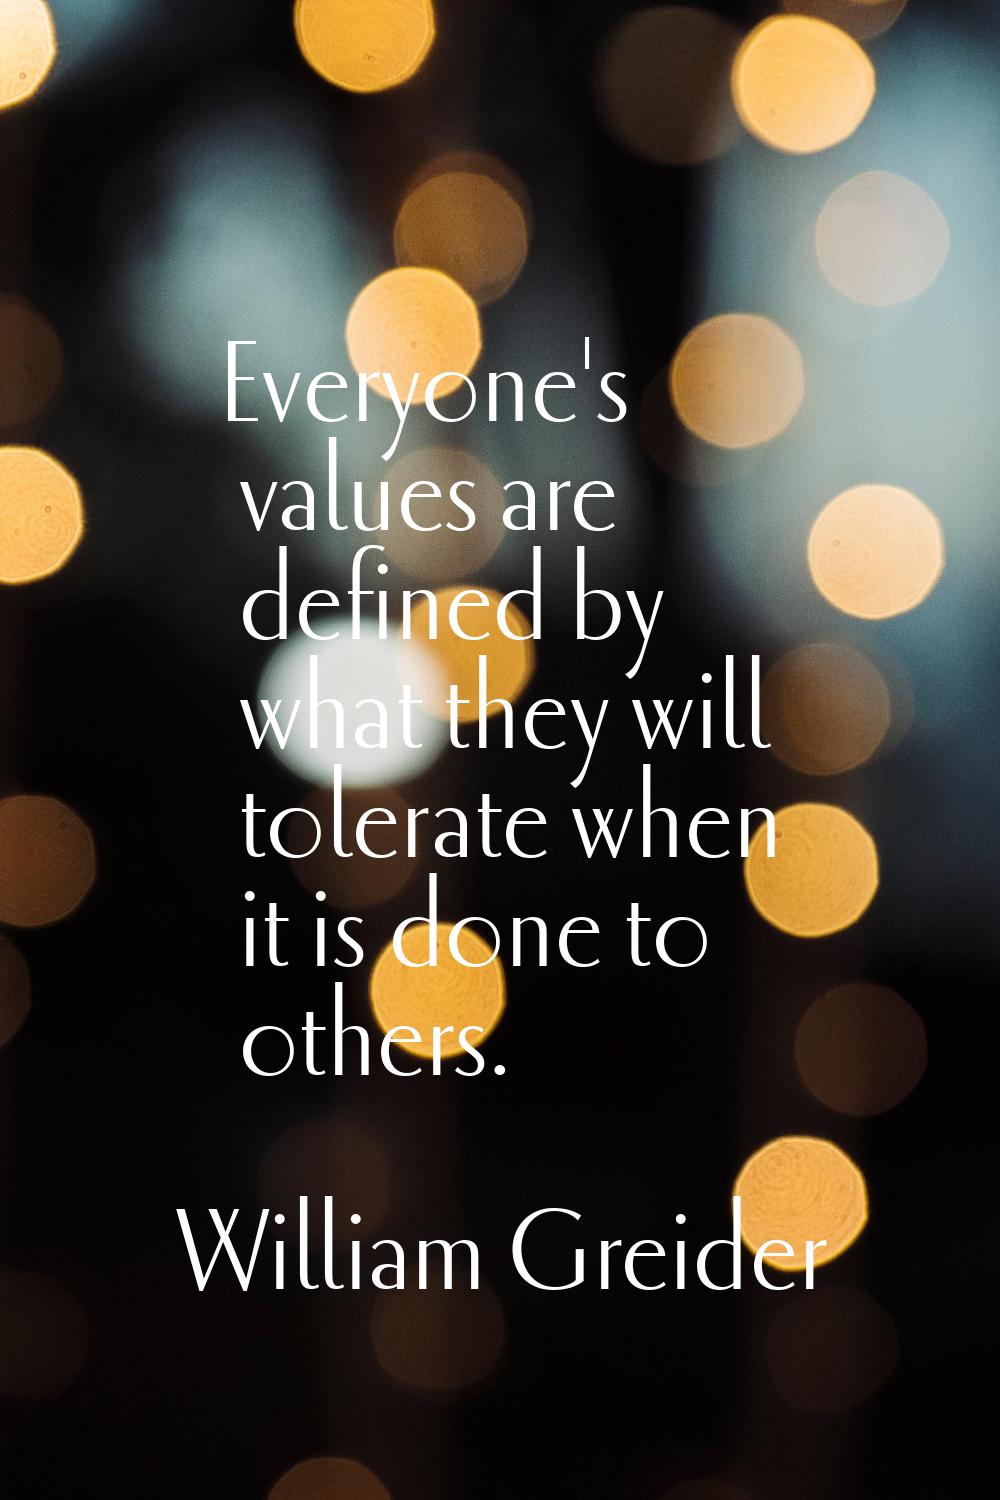 Everyone's values are defined by what they will tolerate when it is done to others.